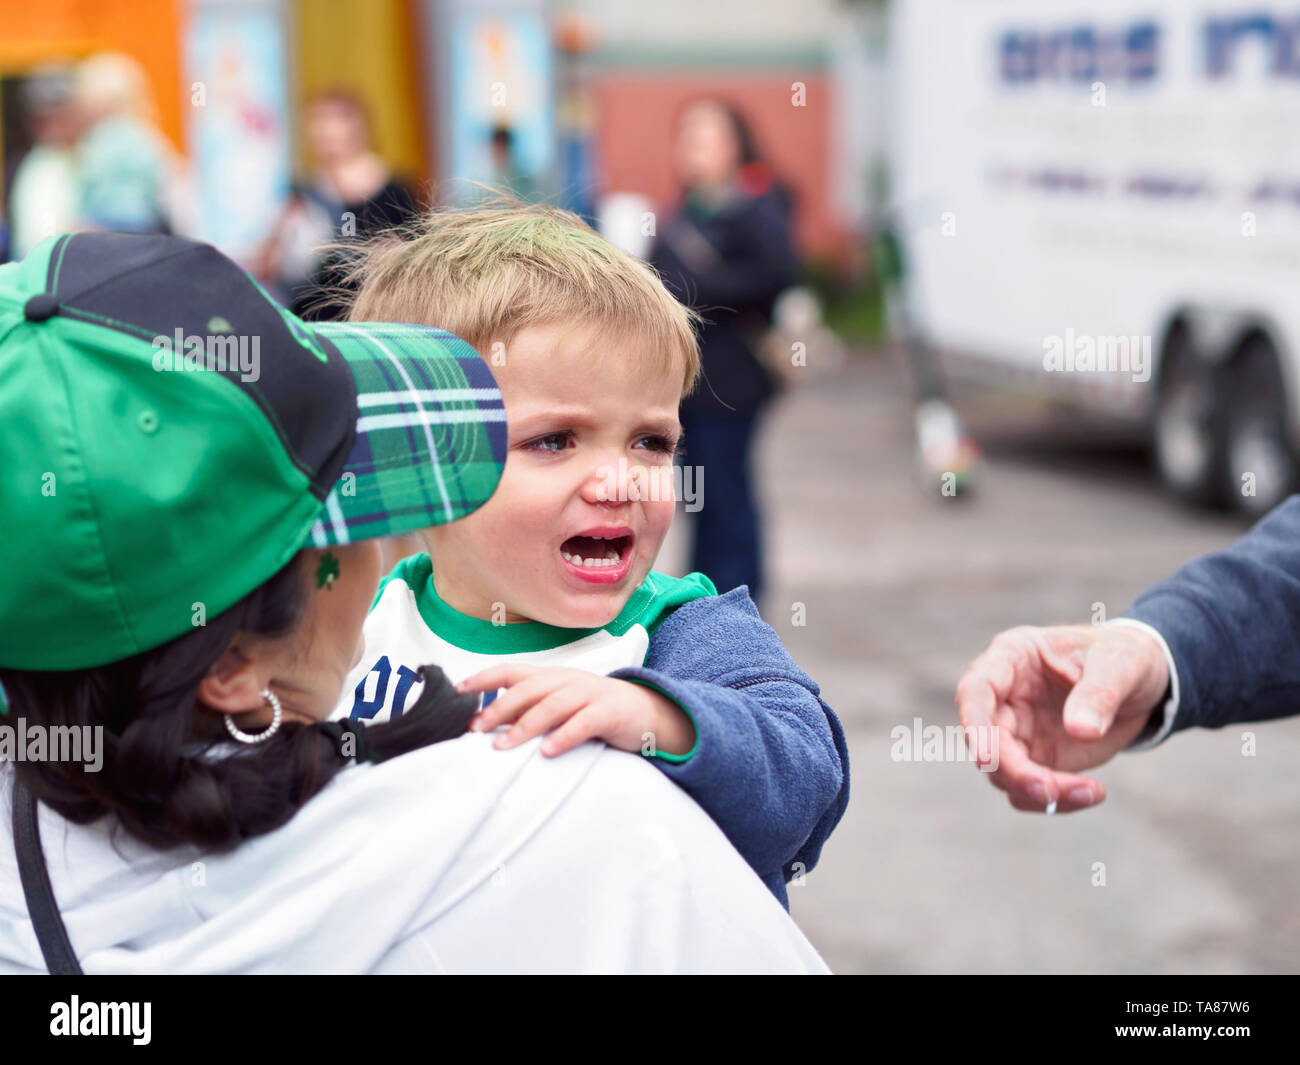 A little boy is crying as his mother holds him at the 2019 St. Patrick's Day Block Party in Corpus Christi, Texas USA. Stock Photo